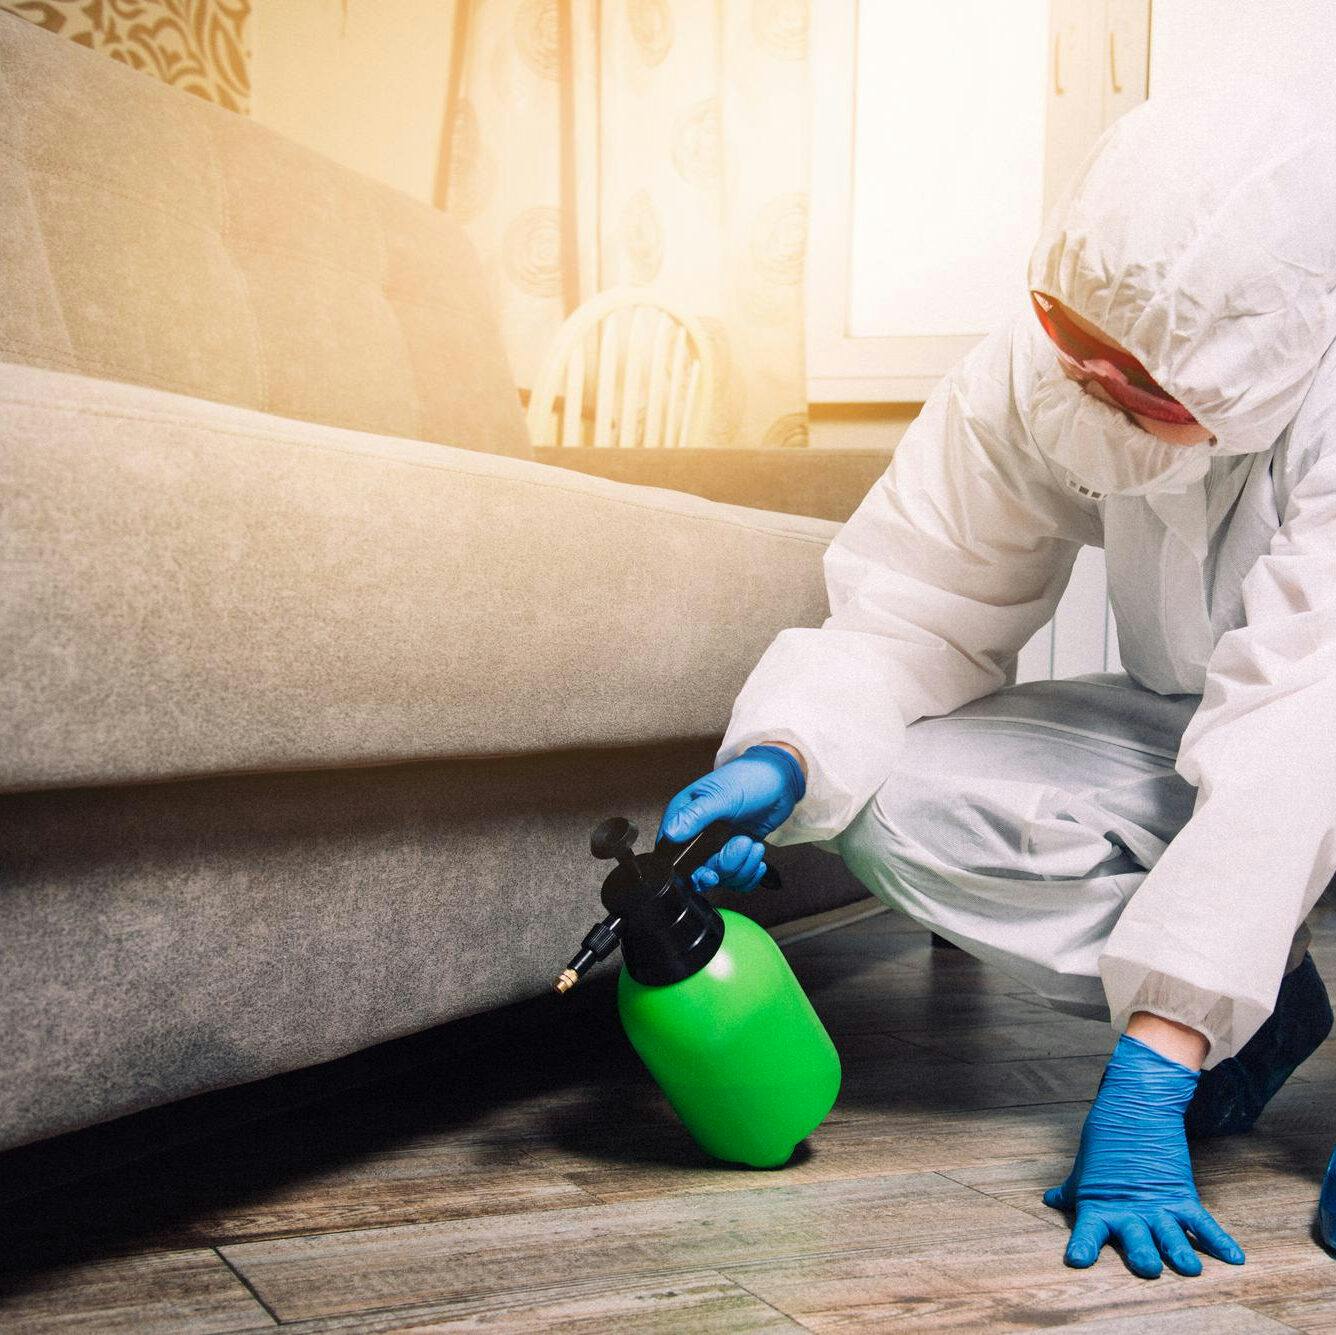 An exterminator in work clothes sprays pesticides with a spray gun. fight against insects in apartments and houses. disinsection of the premises